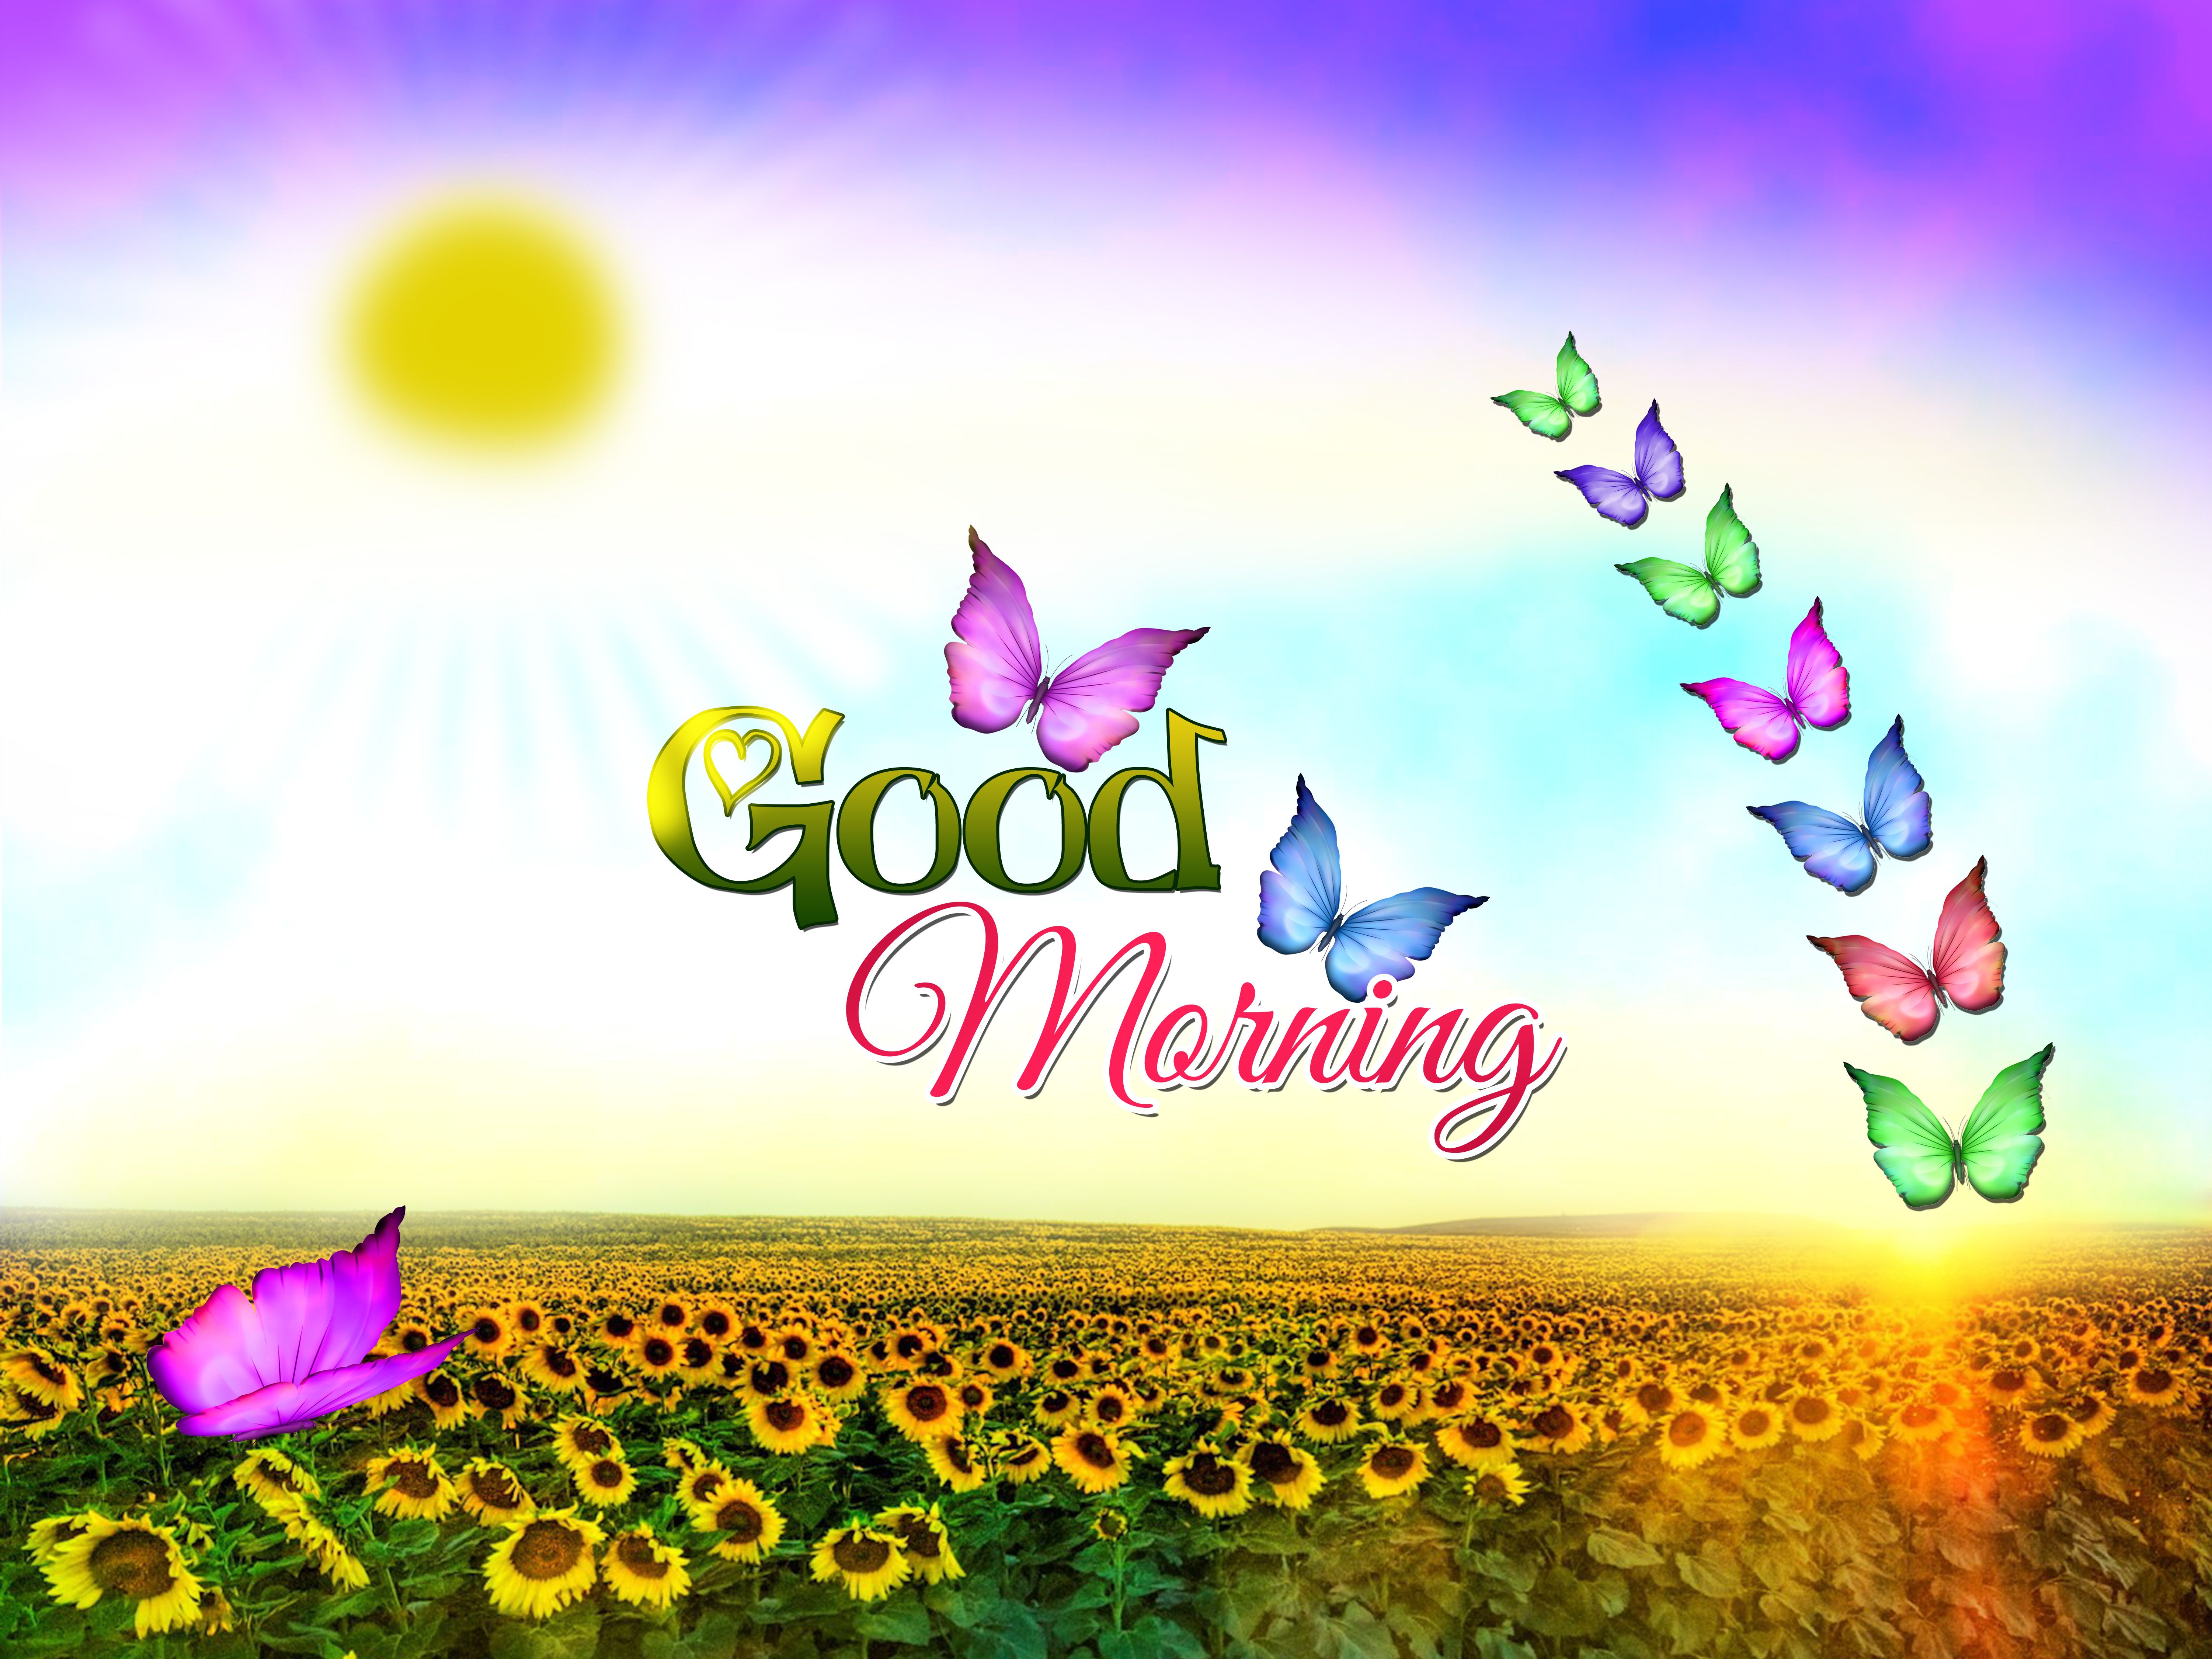 Good Morning Wallpapers Download - Wallpaper Cave